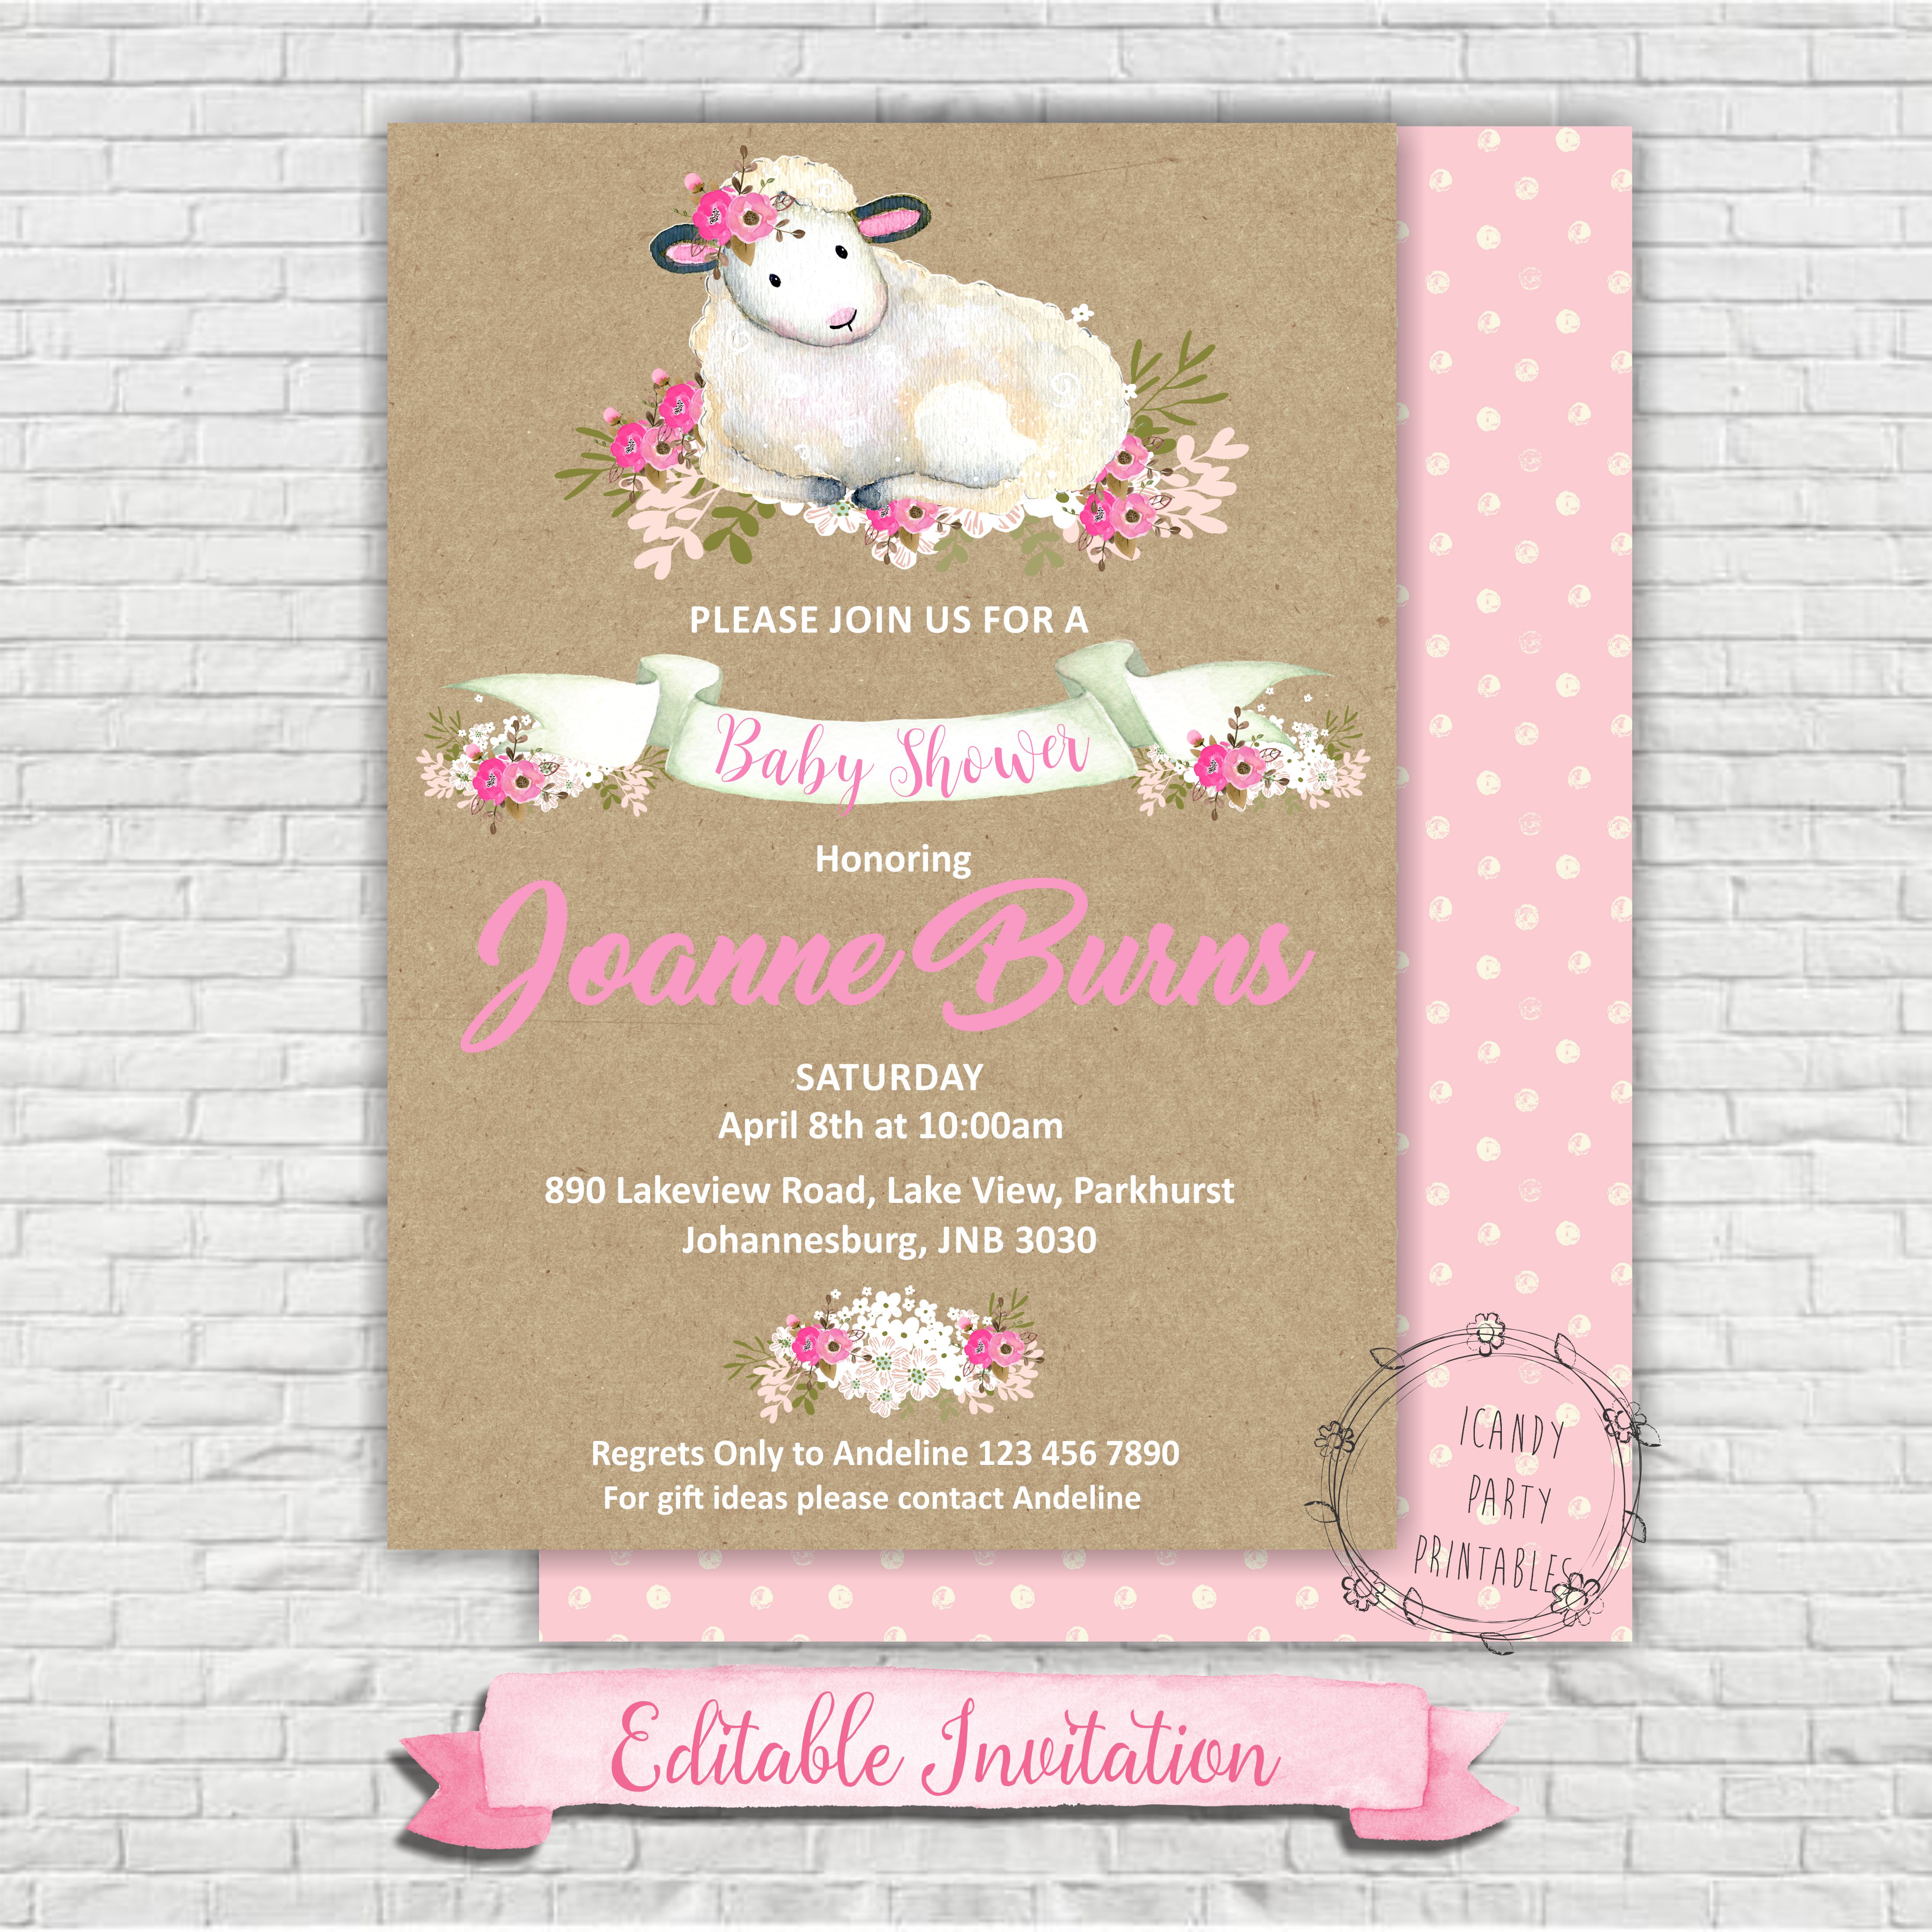 Full Size of Baby Shower:nautical Baby Shower Invitations For Boys Baby Girl Themes For Bedroom Baby Shower Ideas Baby Shower Decorations Themes For Baby Girl Nursery Baby Shower Card Message Ideas Baby Girl Party Plates Baby Shower Invitations Baby Shower Favors